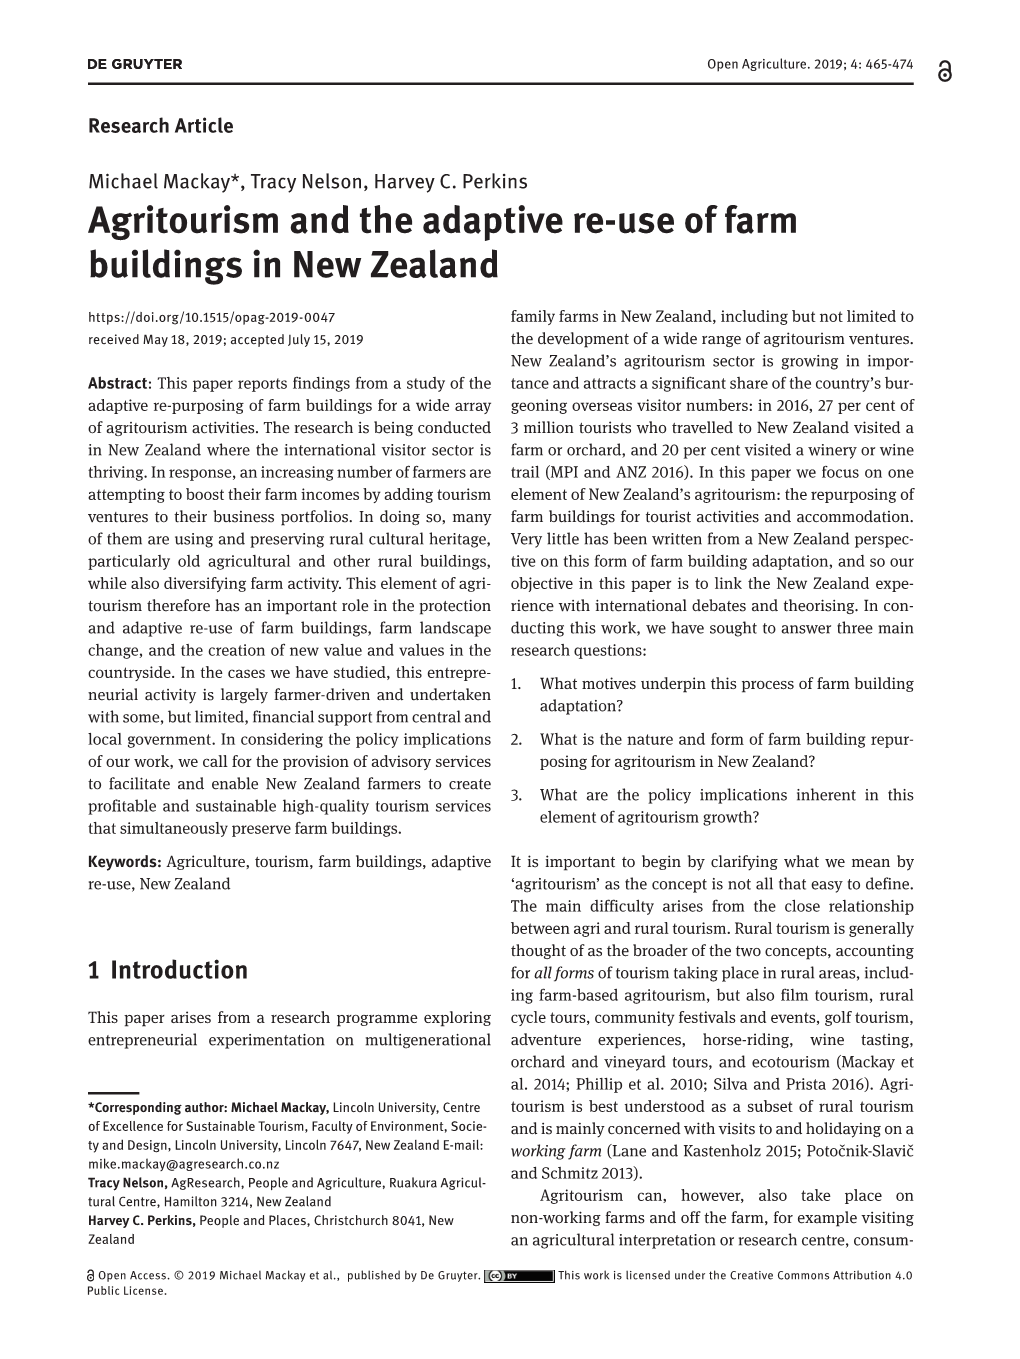 Agritourism and the Adaptive Re-Use of Farm Buildings in New Zealand